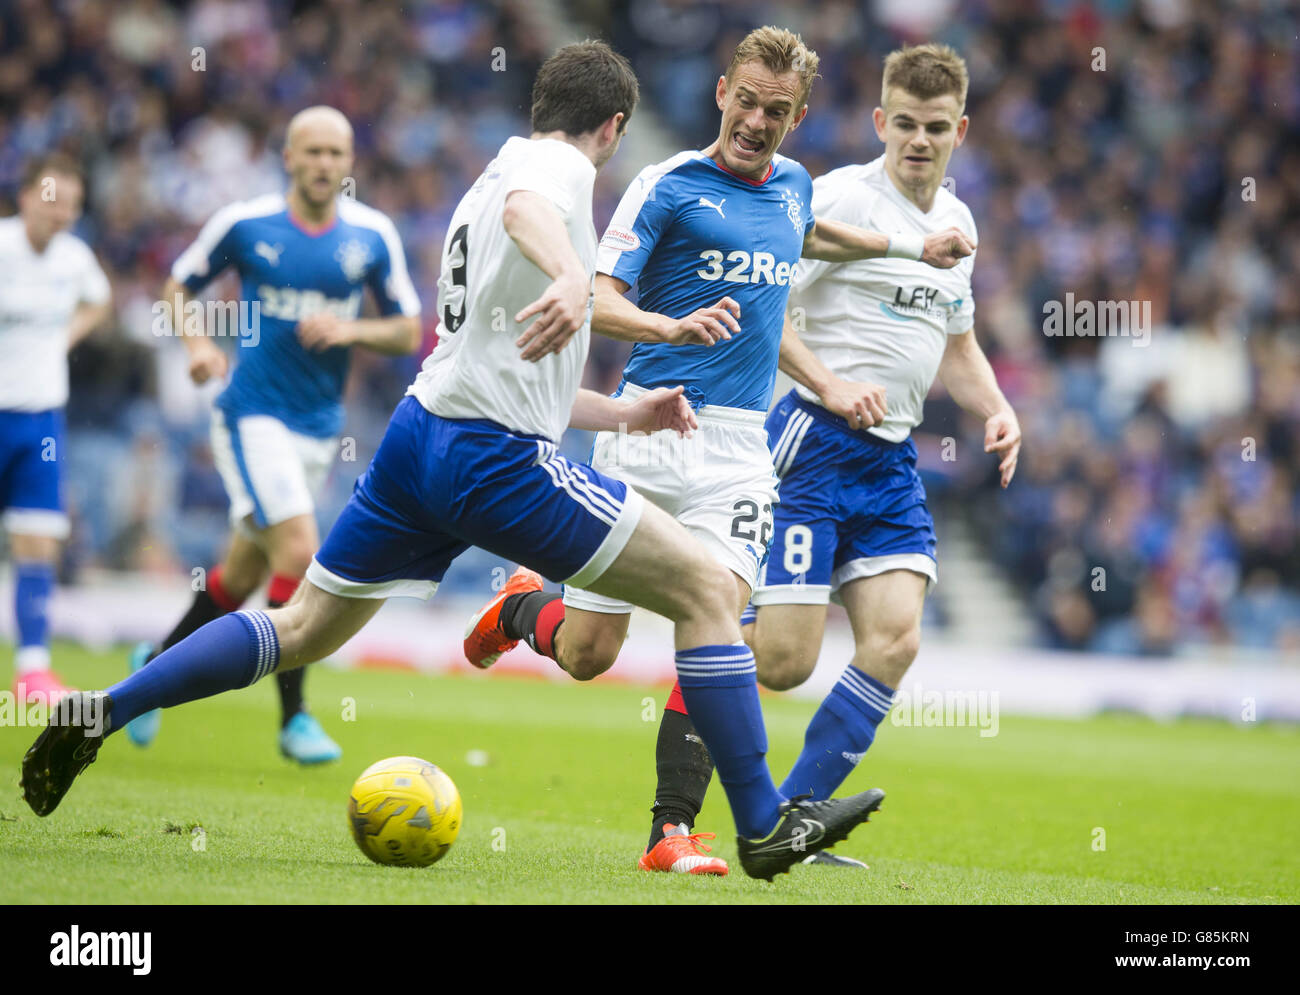 Rangers Dean Shiels (centre) during the Scottish Communities League Cup match at Ibrox Stadium, Glasgow. Stock Photo